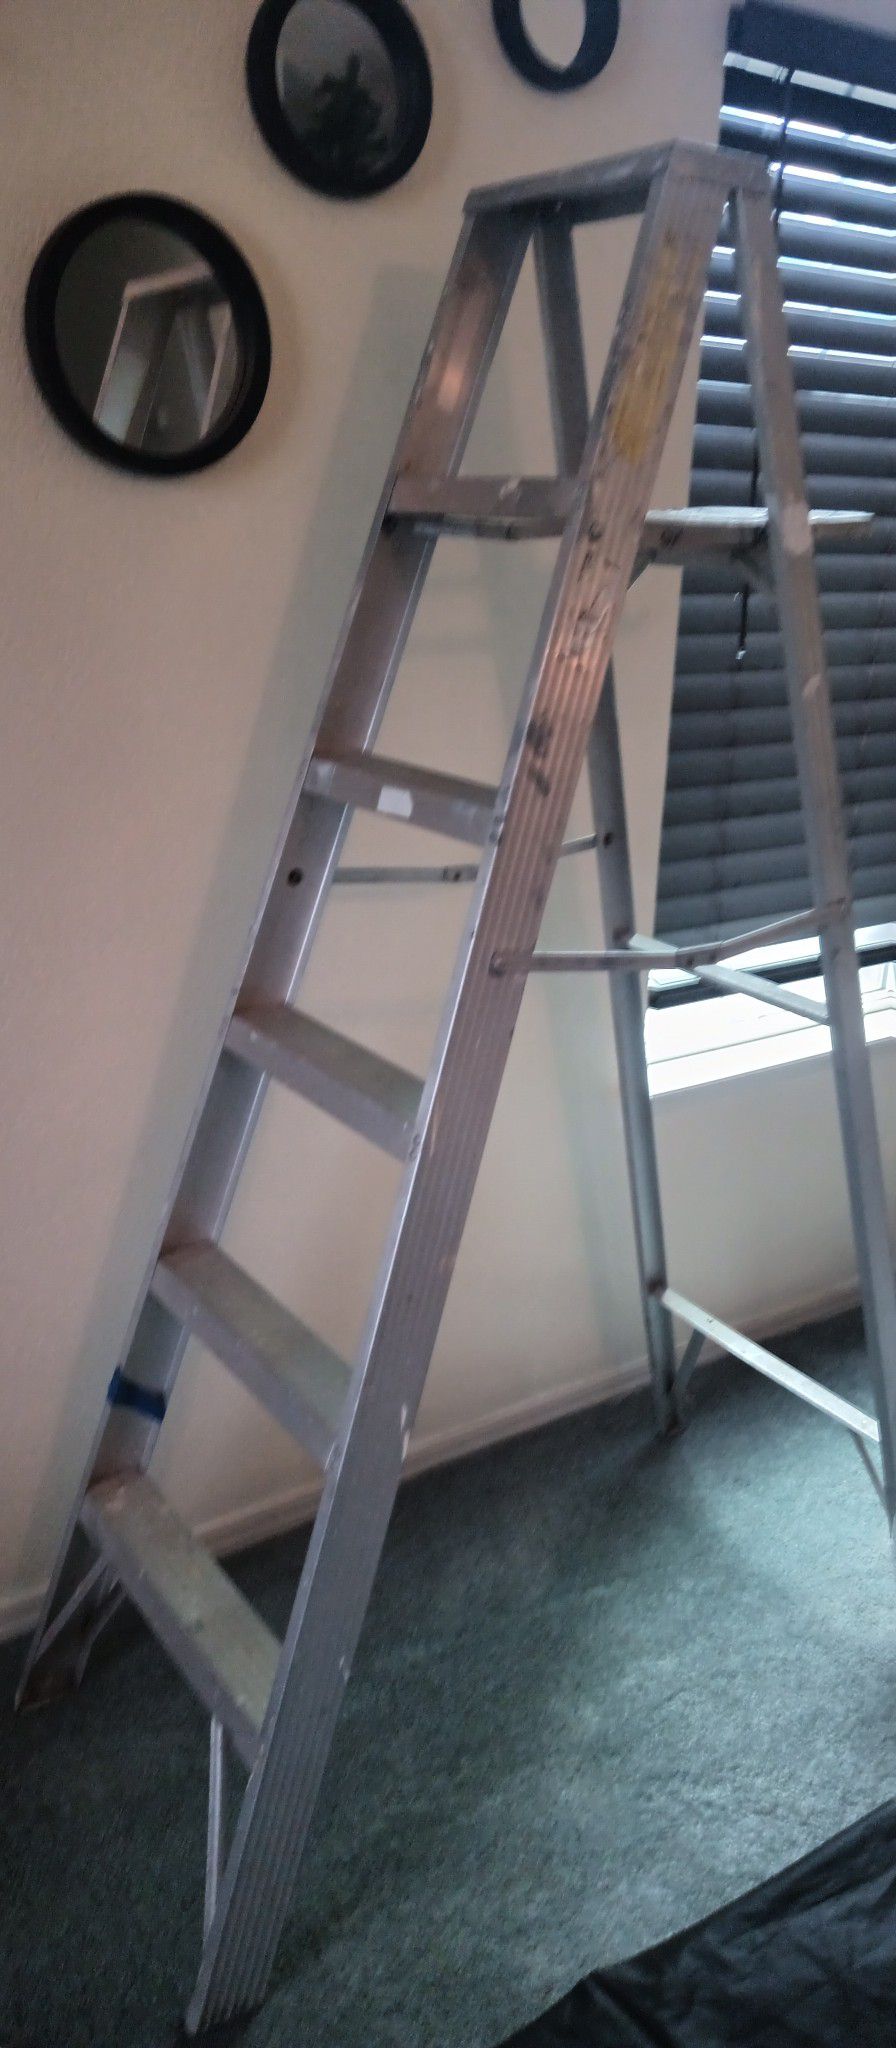 5 1/2 Foot Aluminum Step Ladder. It's Nice And Sturdy.